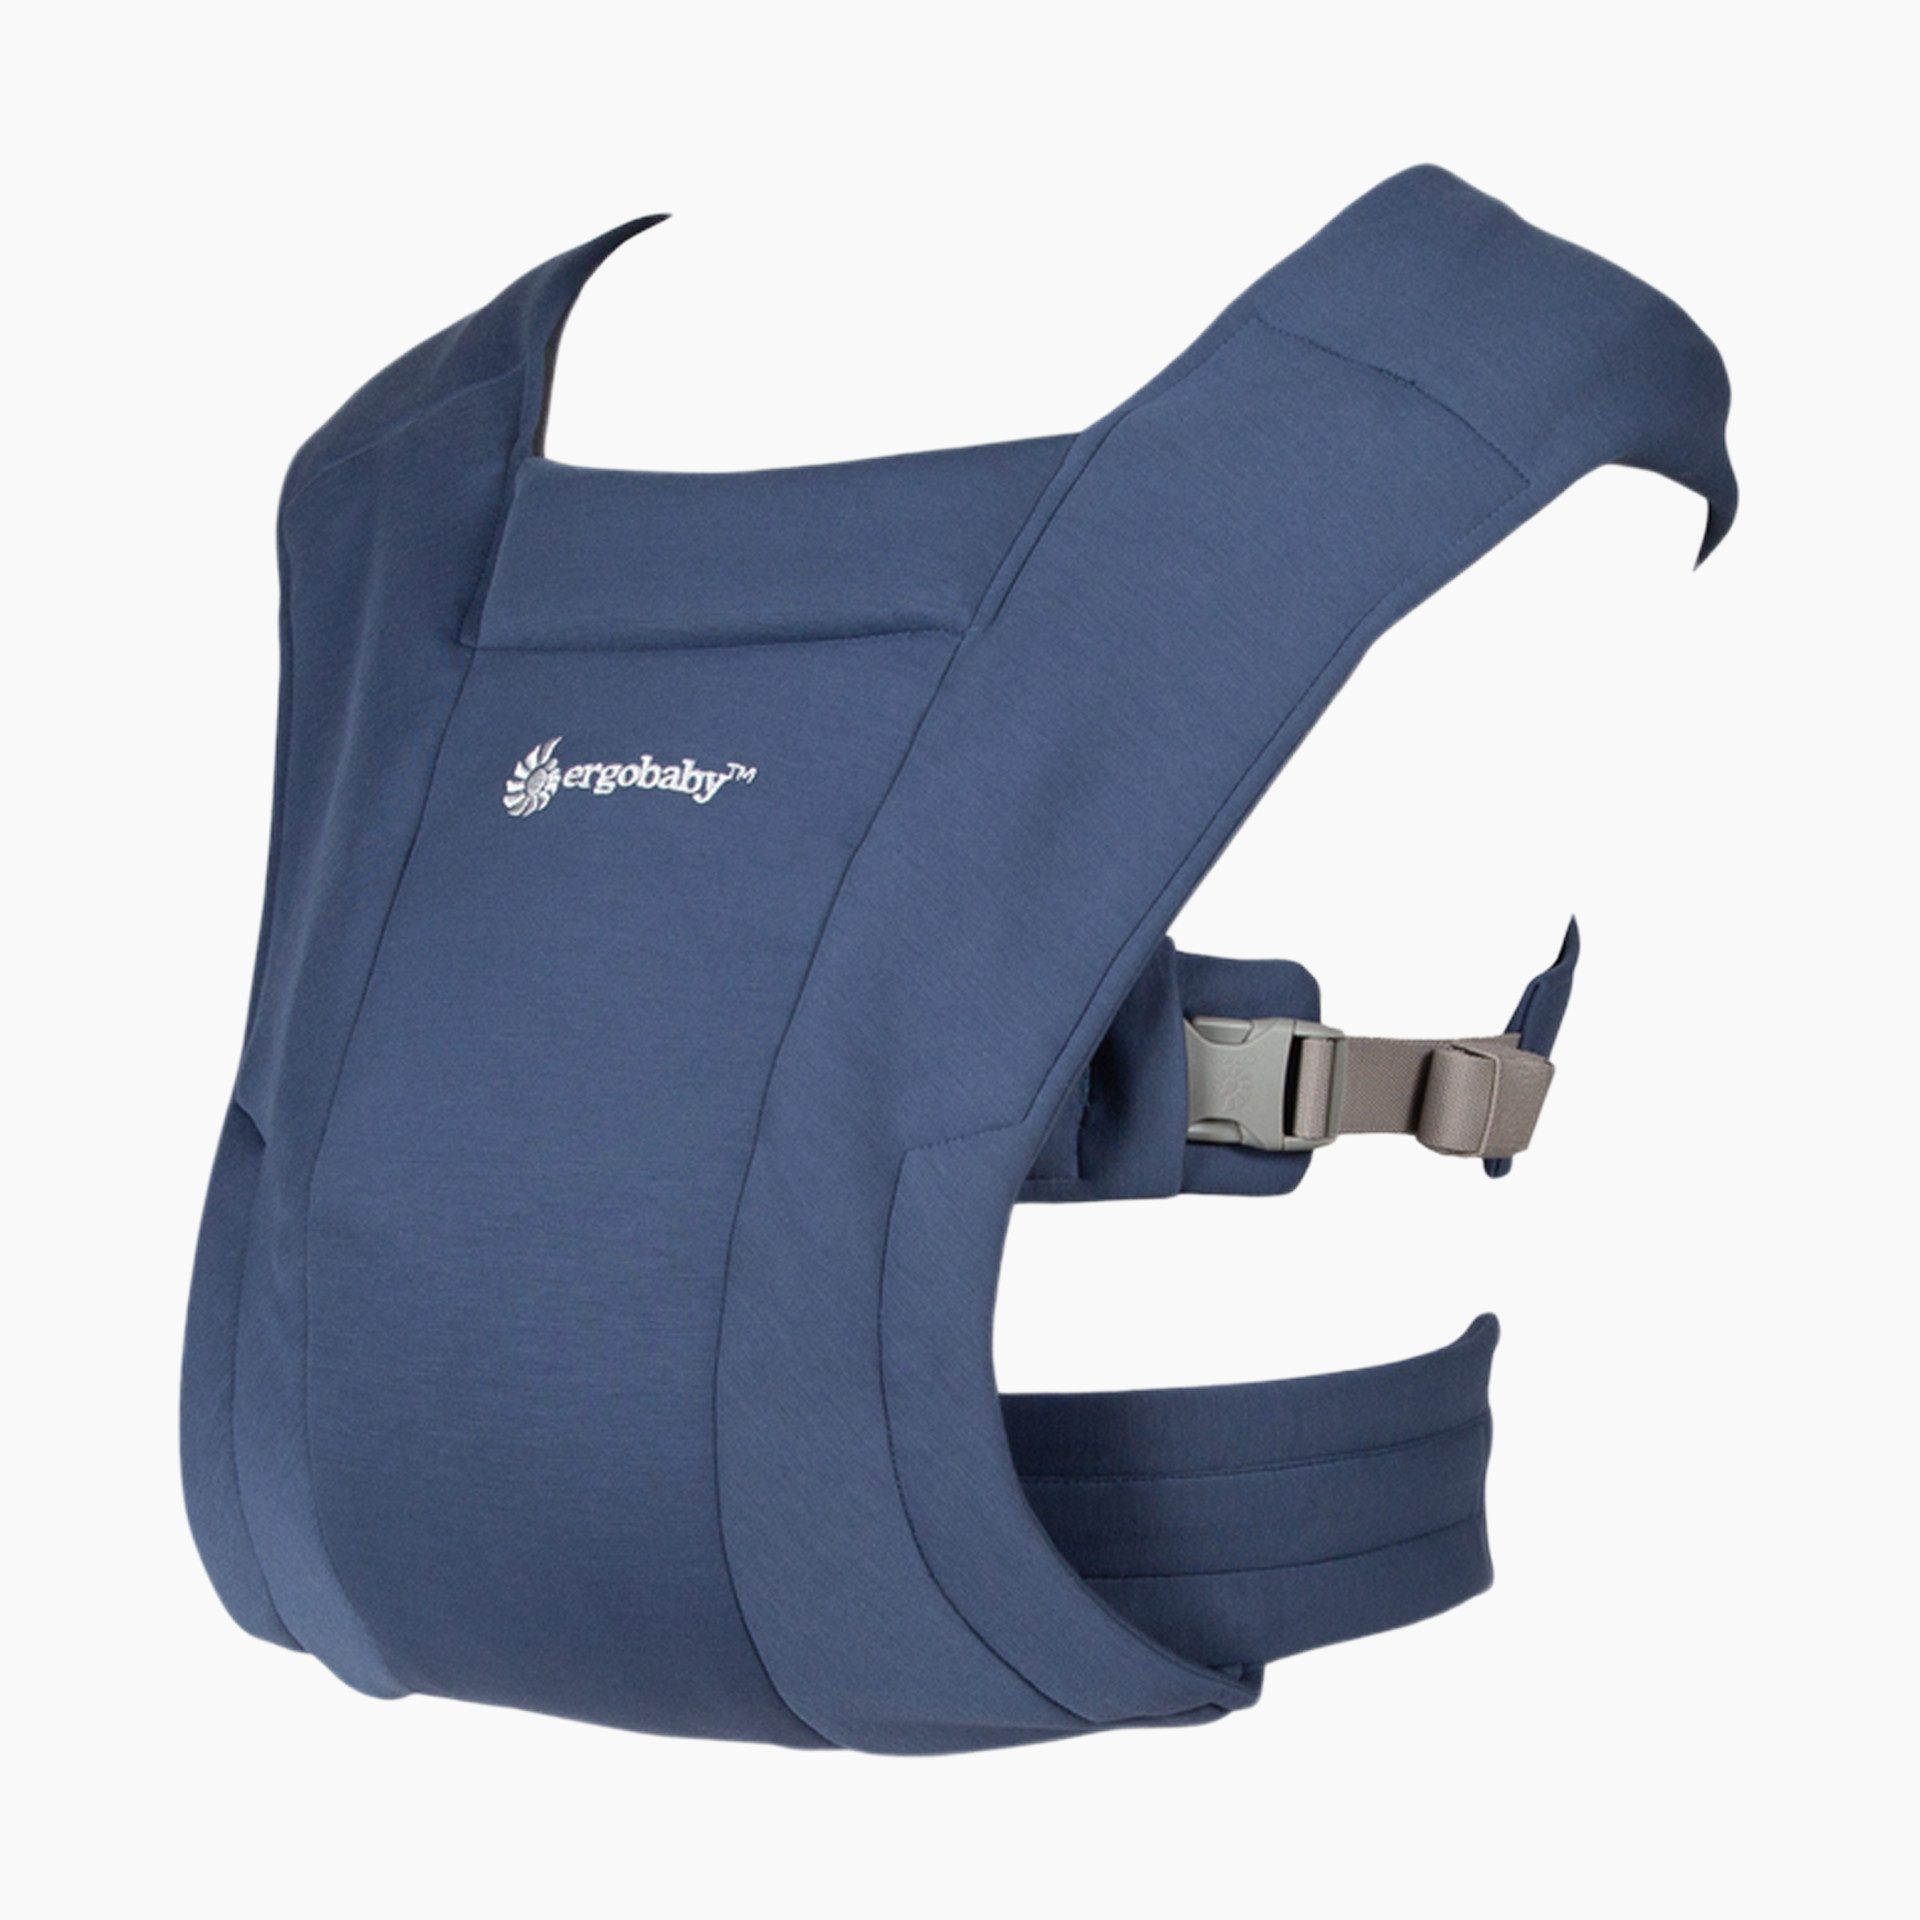 Ergobaby Embrace Buckle Carrier – Bean Tree Baby